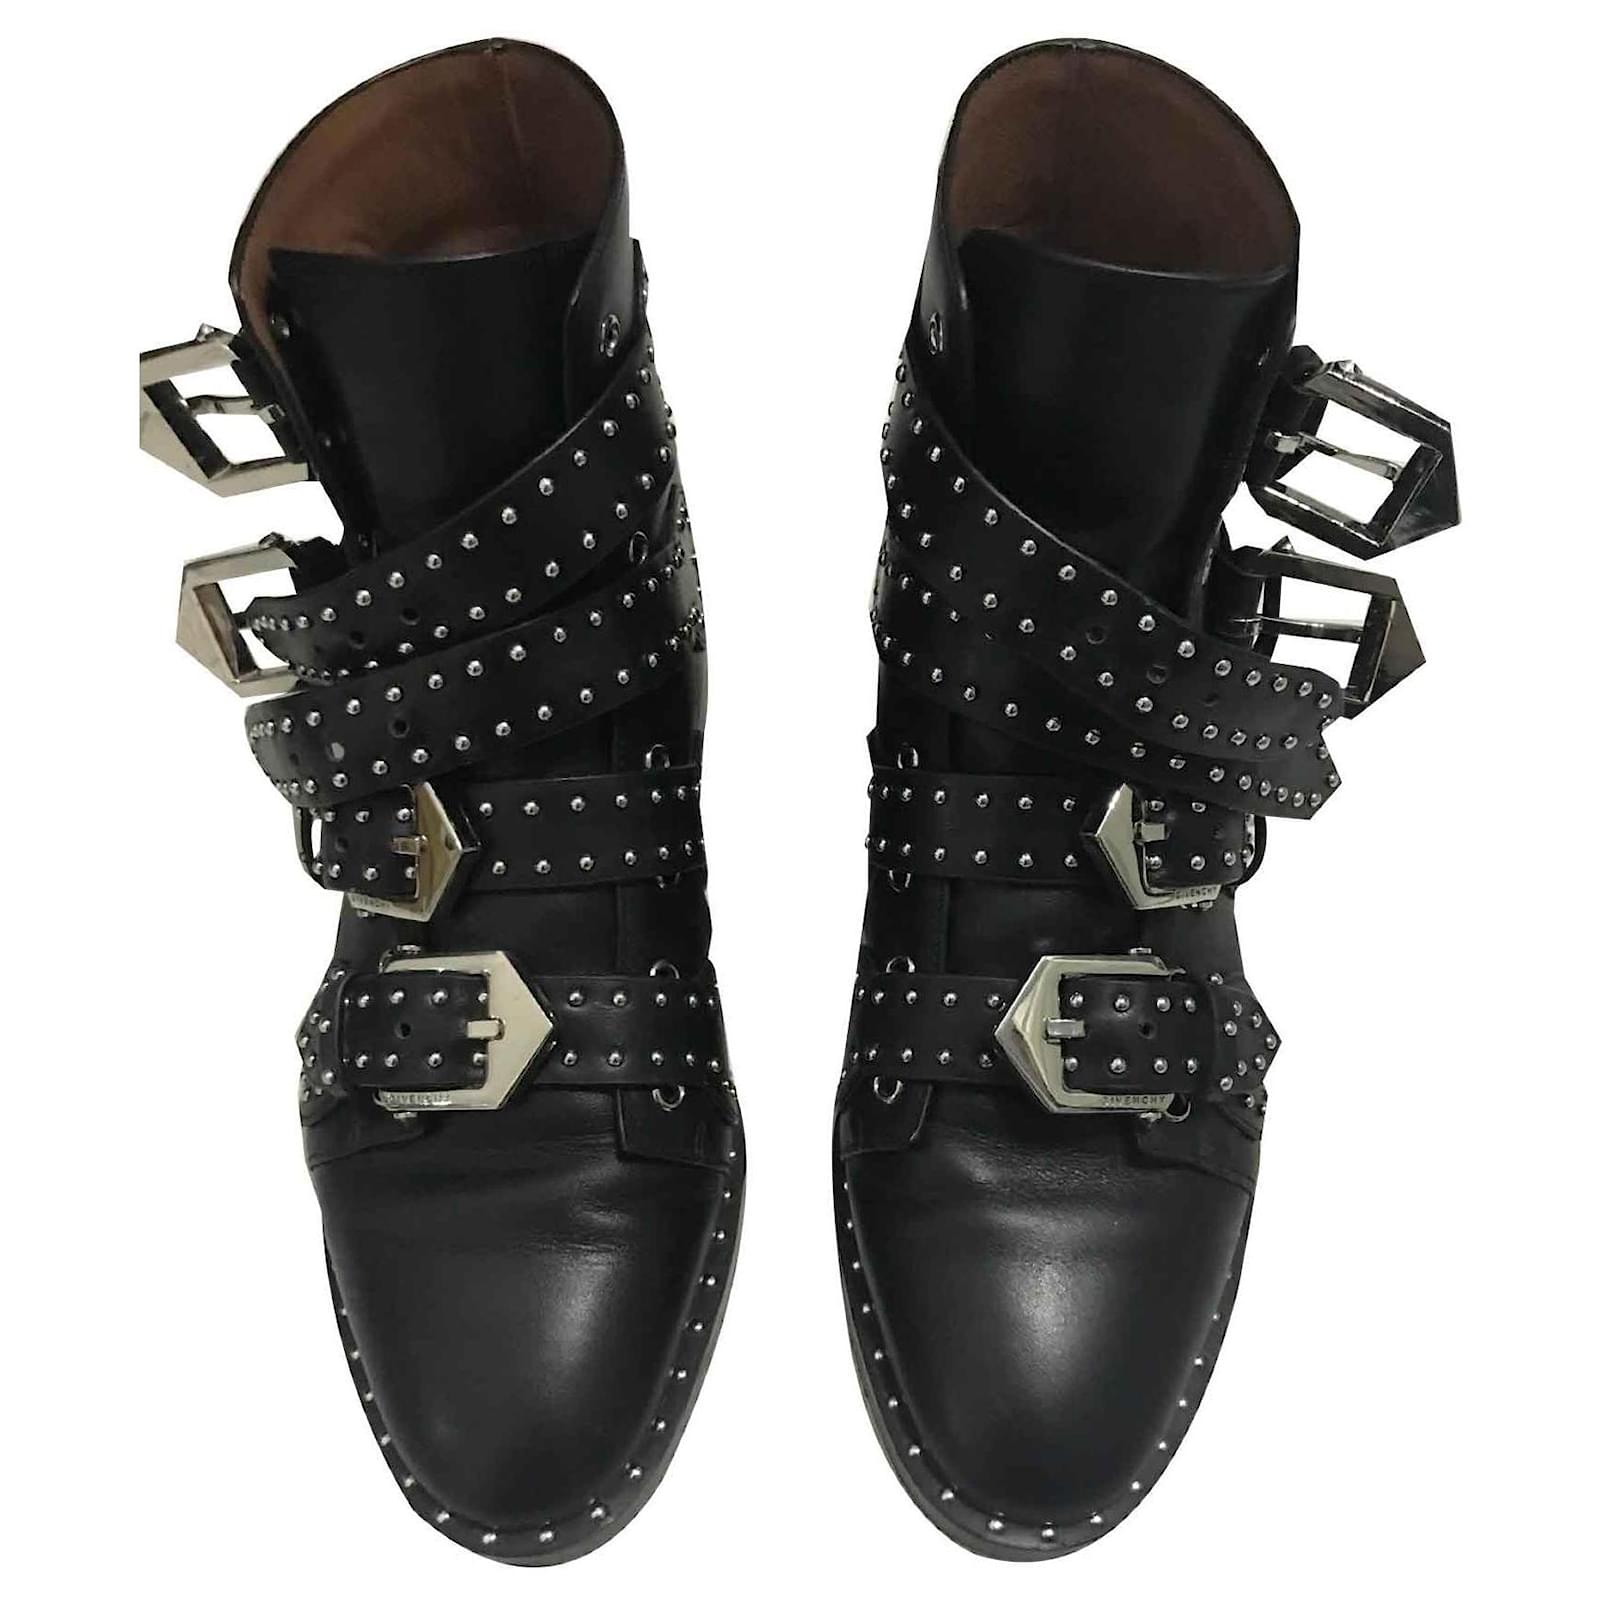 Givenchy Ankle Boot. Givenchy Ankle Shoes. Сапоги Givenchy со звездами.